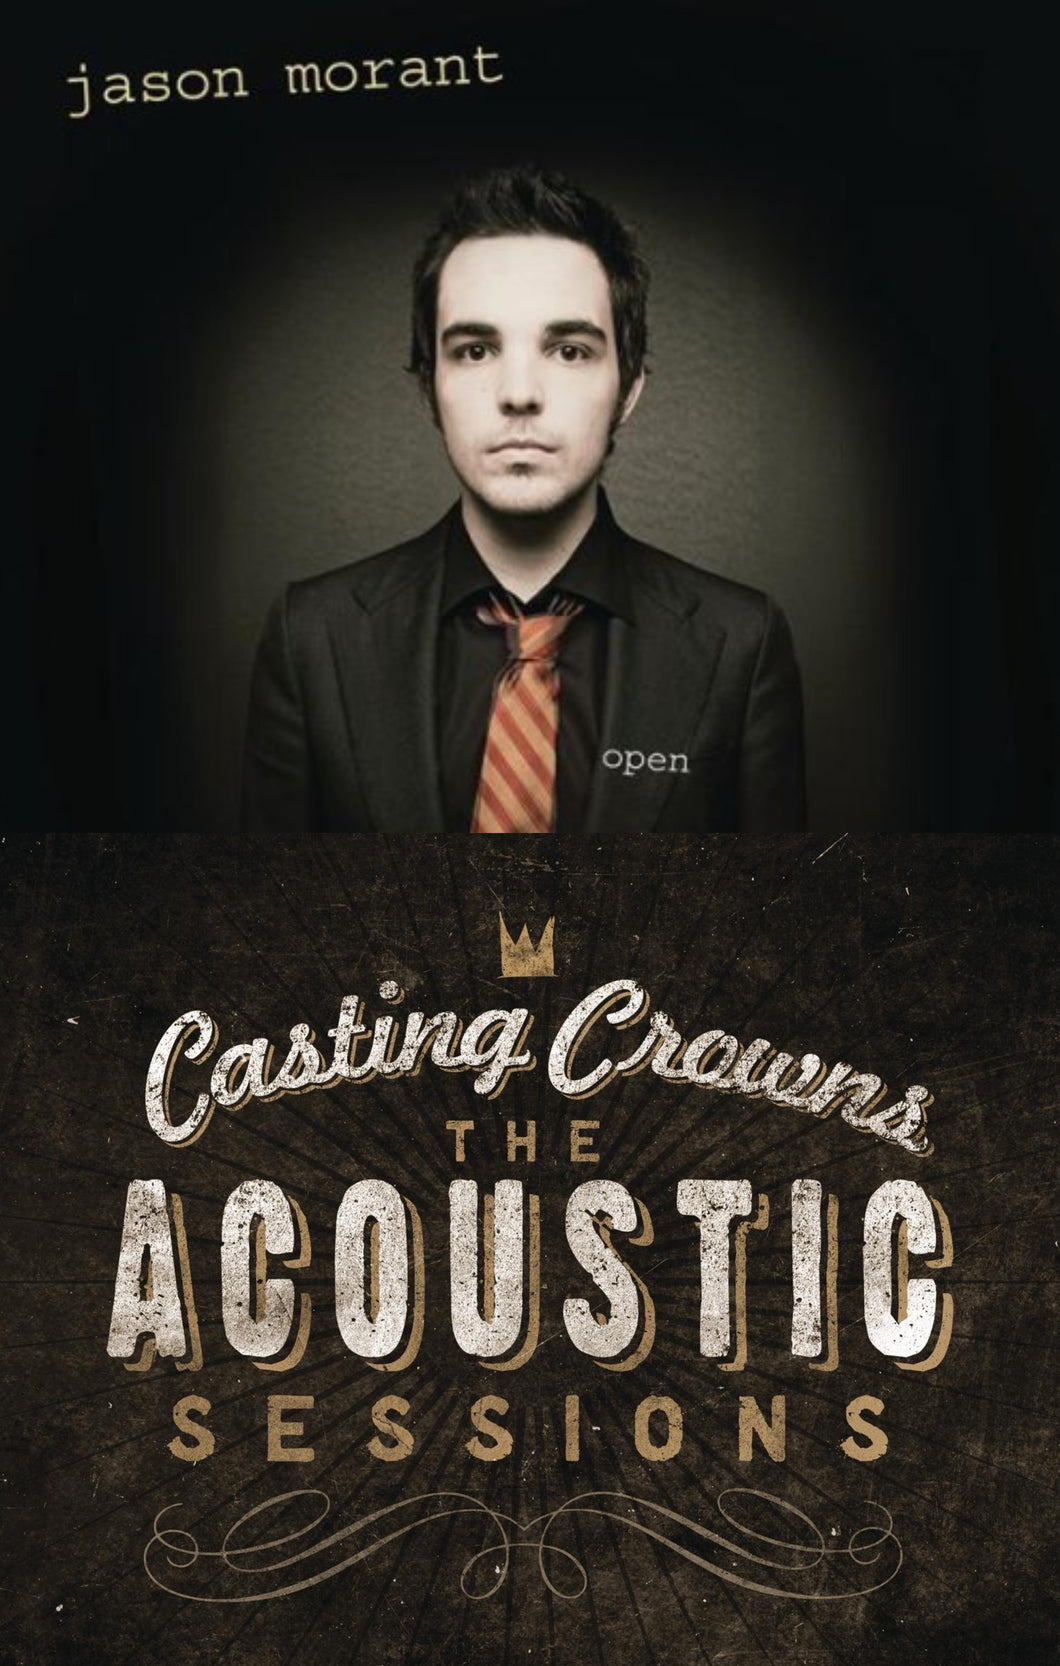 Jason Morant Open + Casting Crowns The Acoustic Sessions 2CD